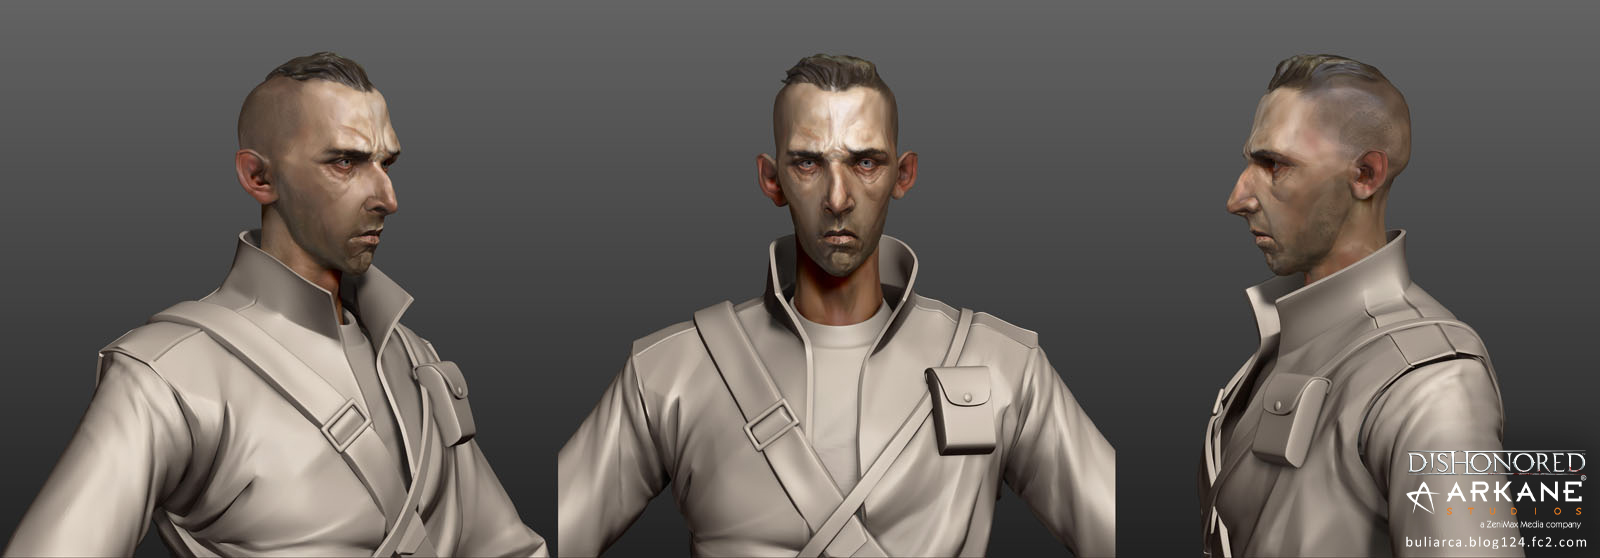 Dishonored - The Character Art - Page 2 — polycount